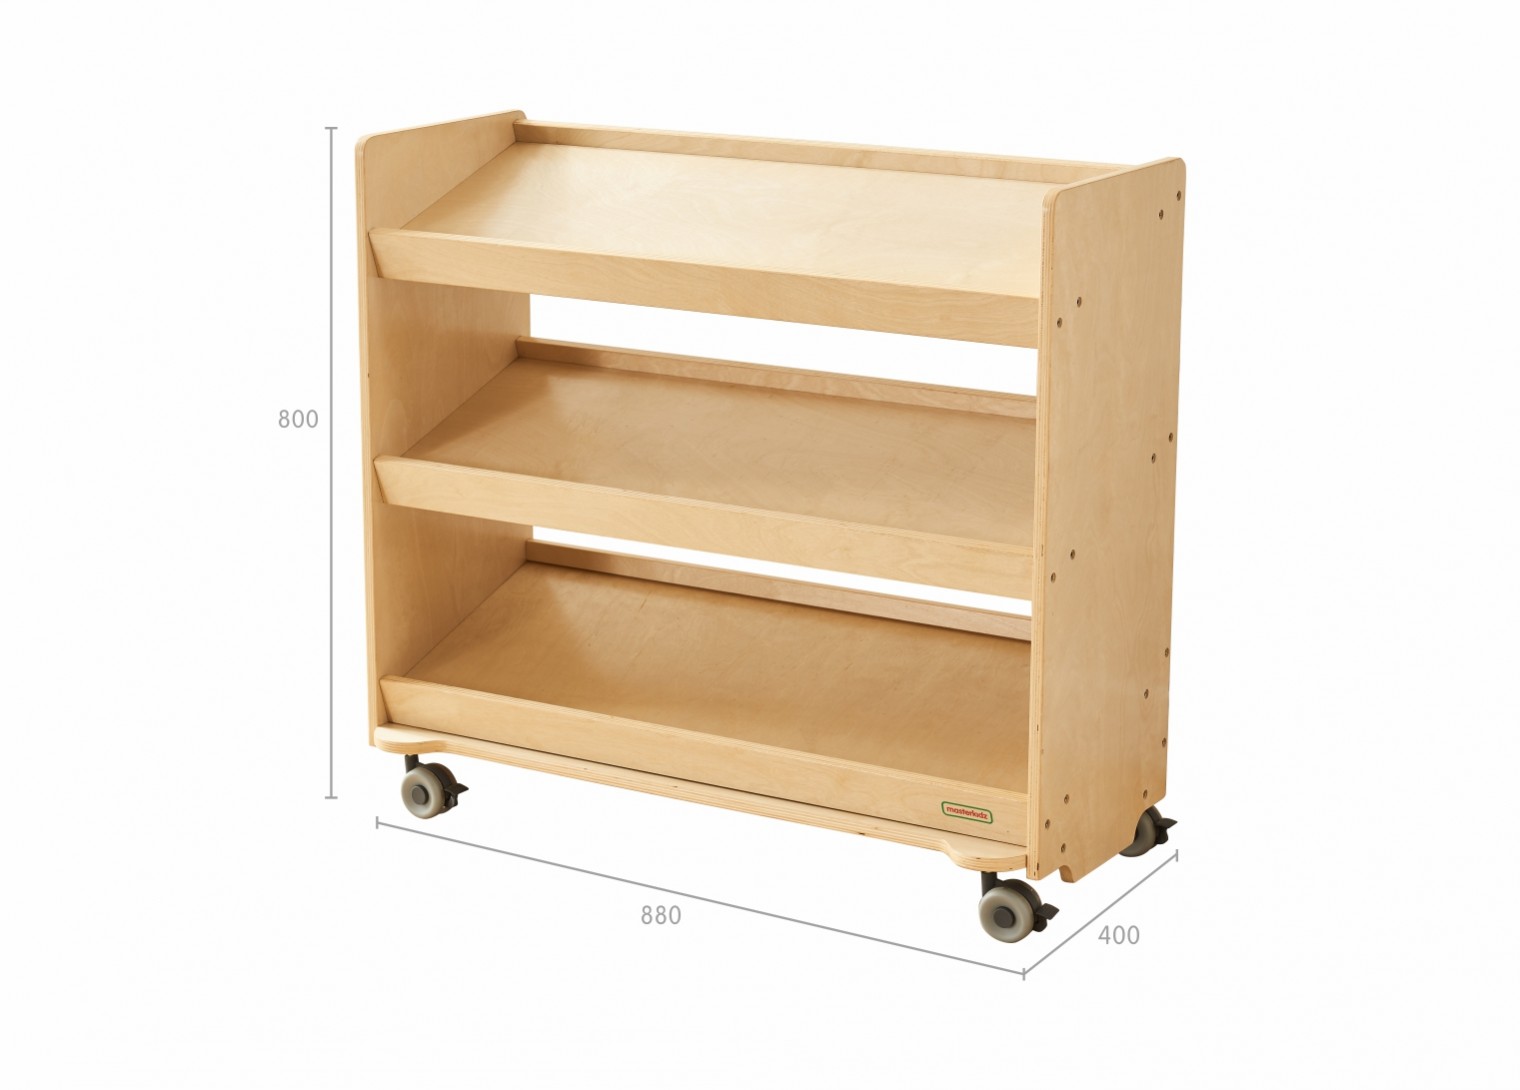 800H x 880L Mobile Inclined Shelving Unit (Trays Not Included)